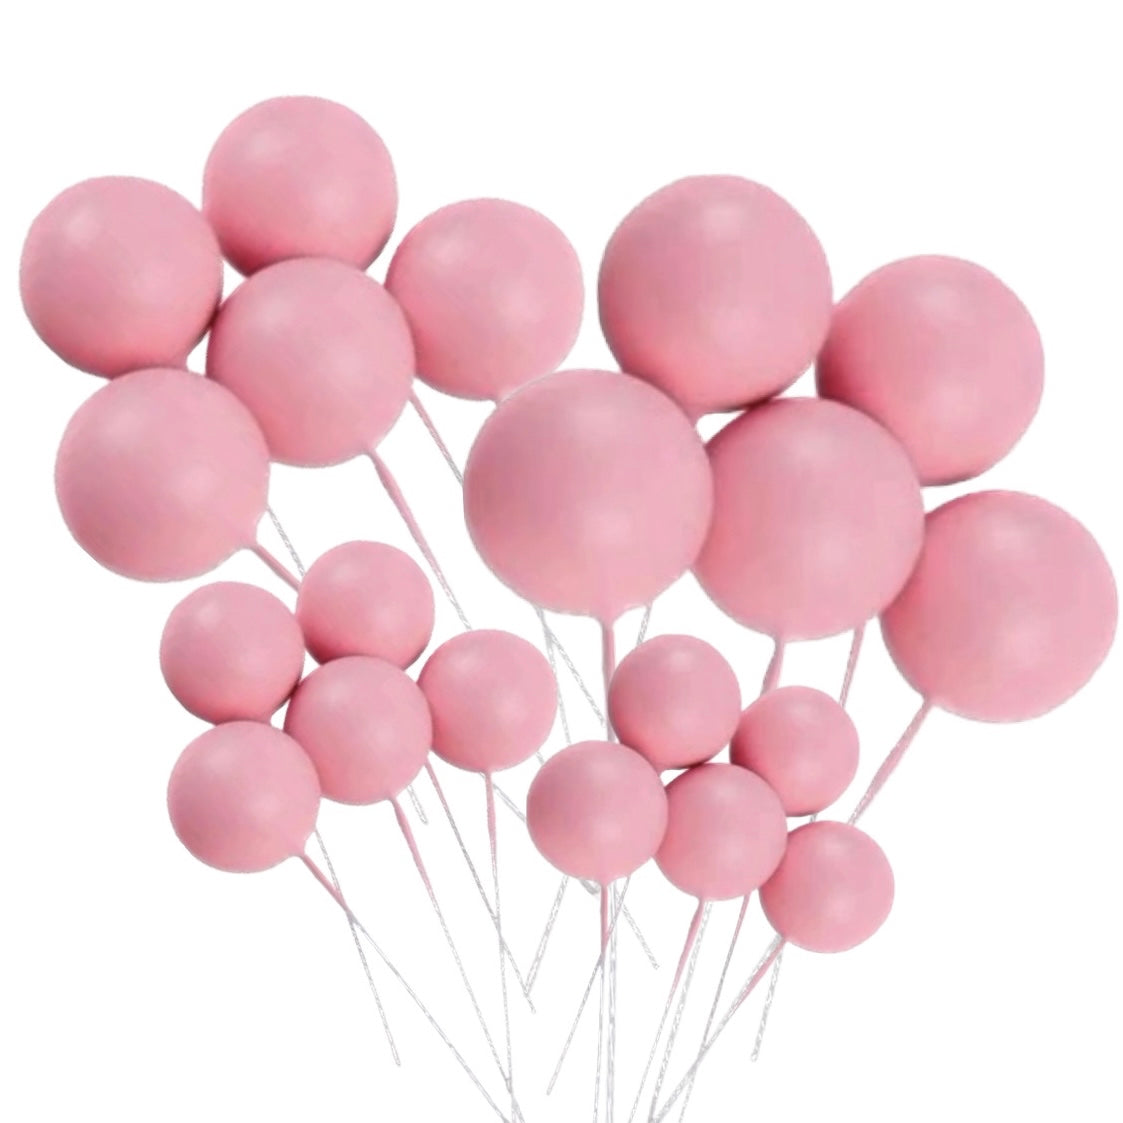 PINK BALLS - PACK OF 20